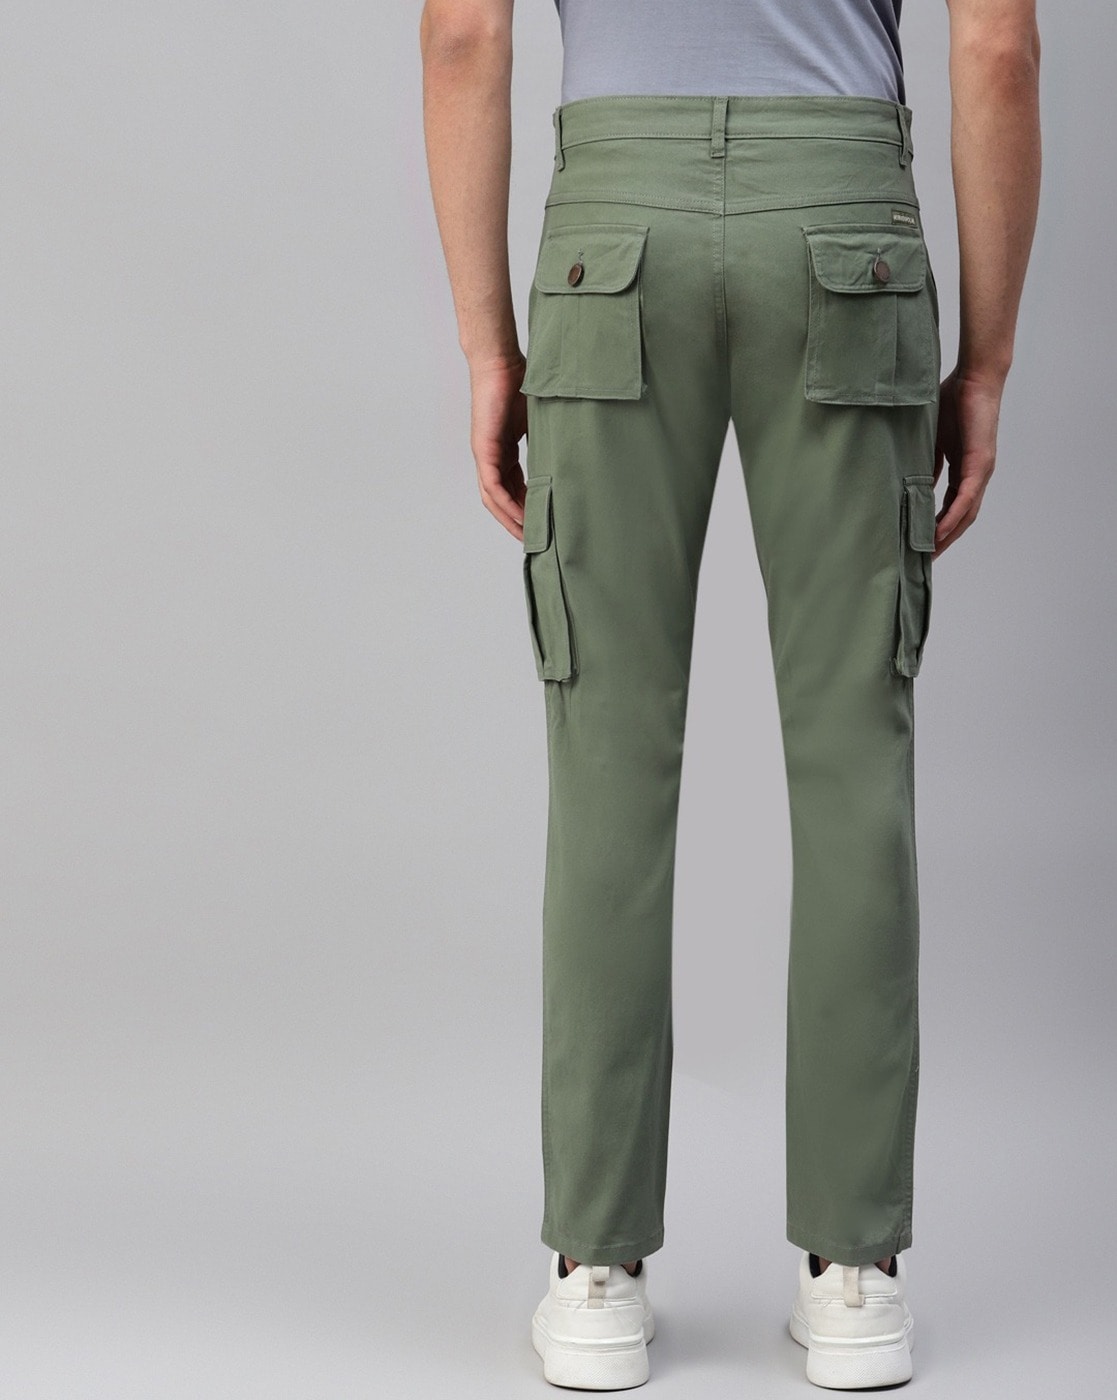 Wide-Leg Khaki Pants Are Back. For Real This Time. - WSJ